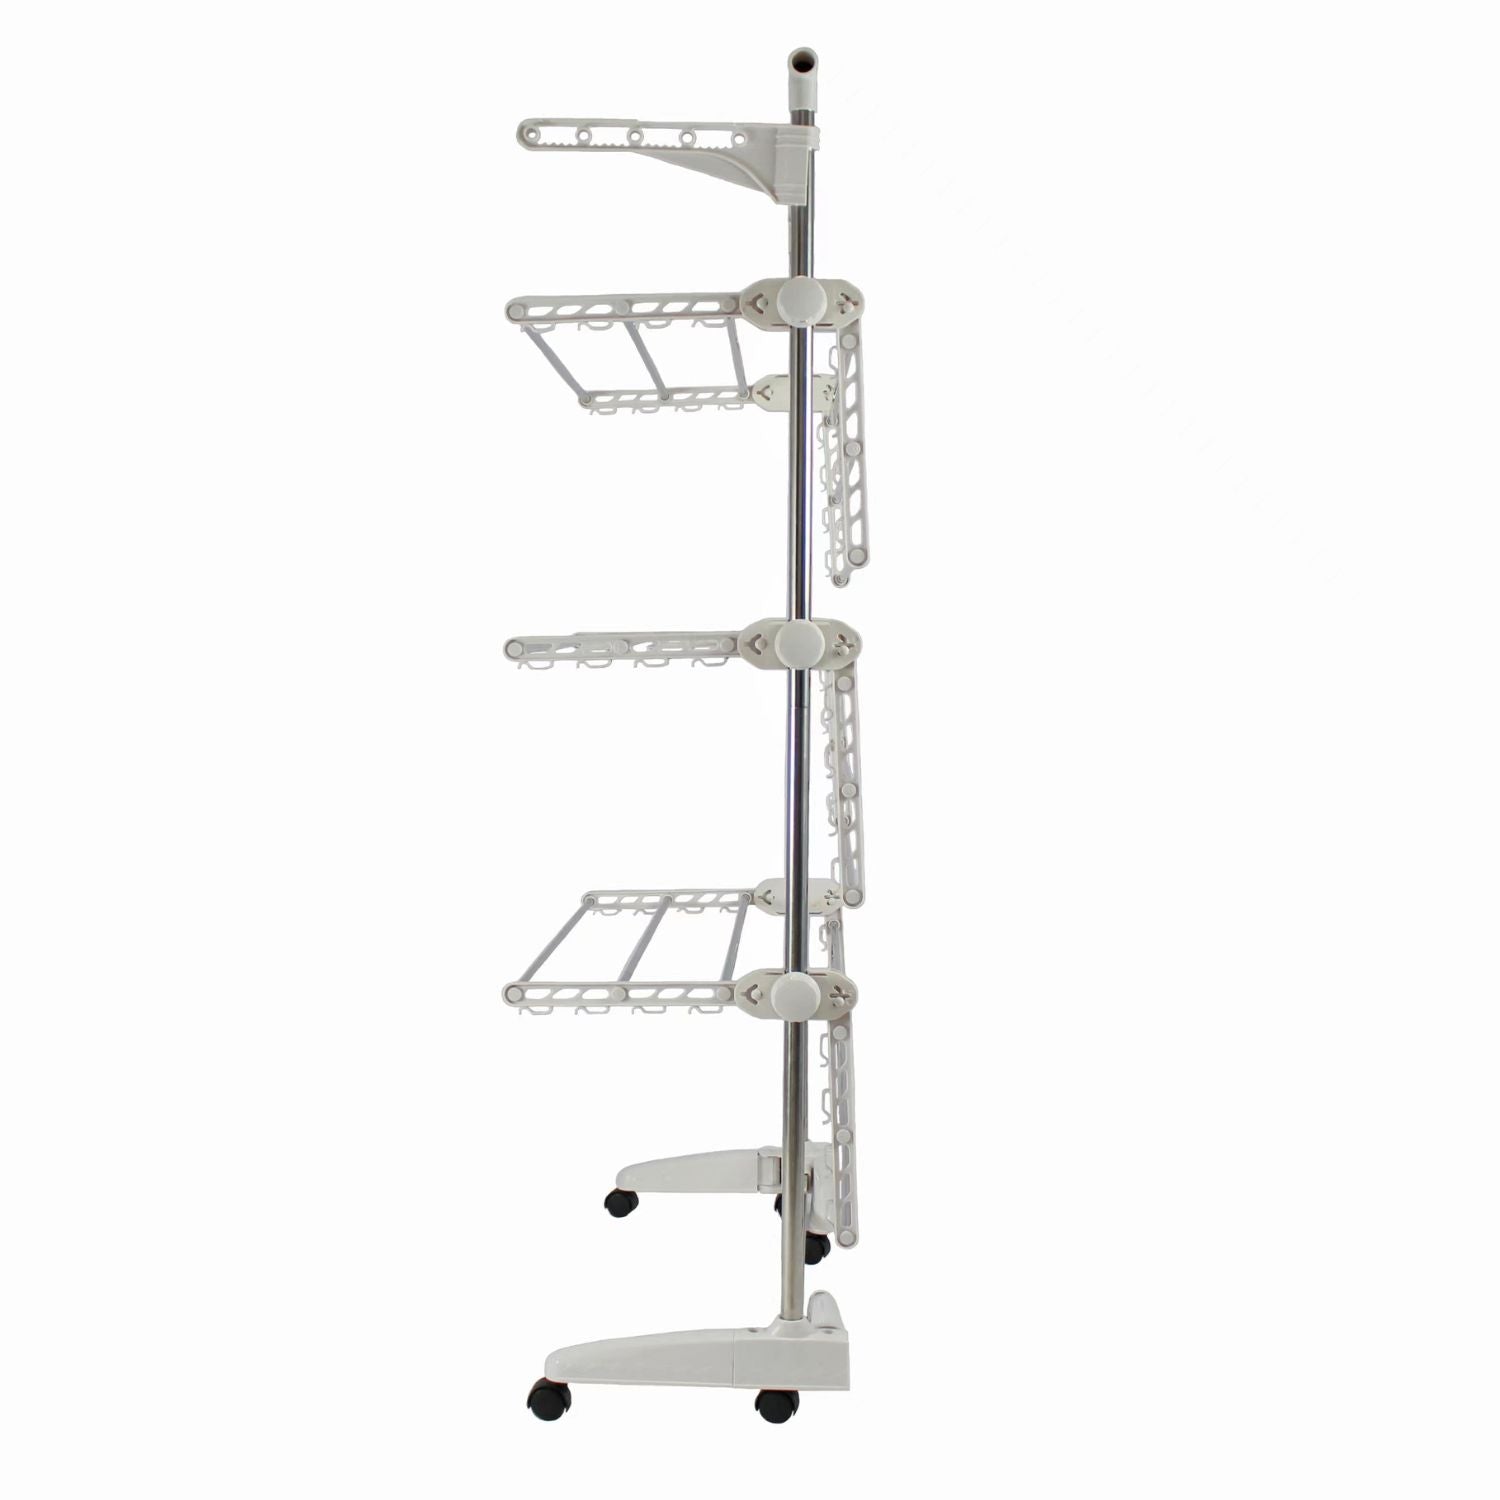 GOMINIMO Laundry Drying Rack 3 Tier (White) GO-LDR-100-JL - SILBERSHELL